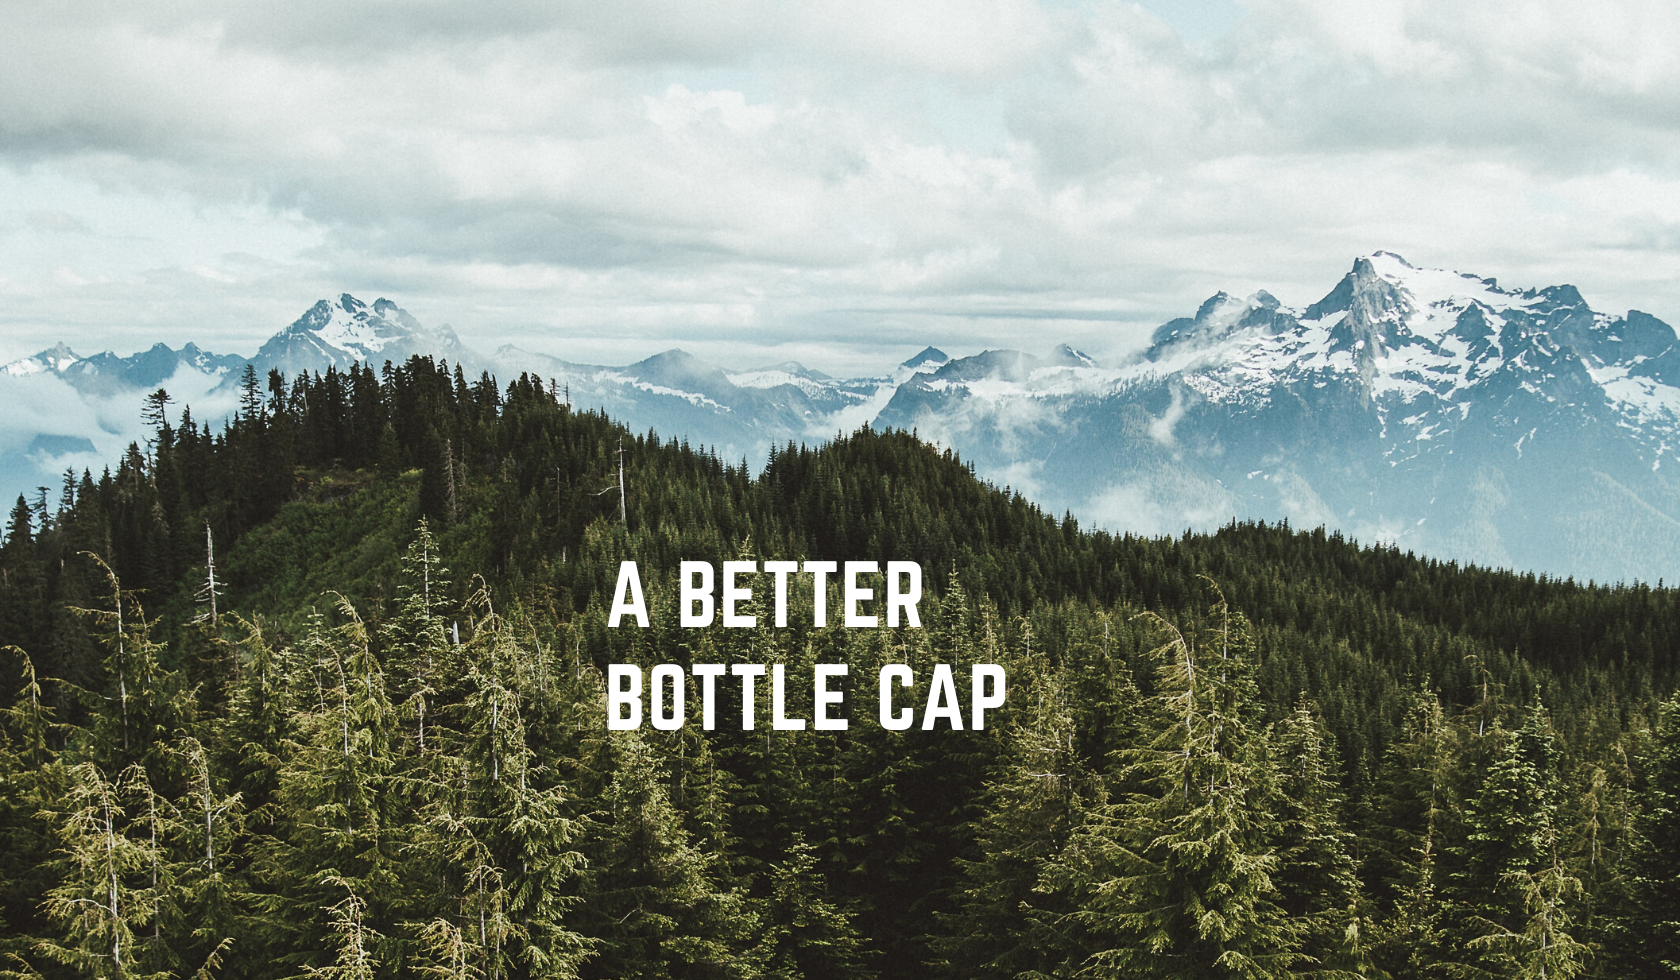 Say Hello to a Better Bottle Cap